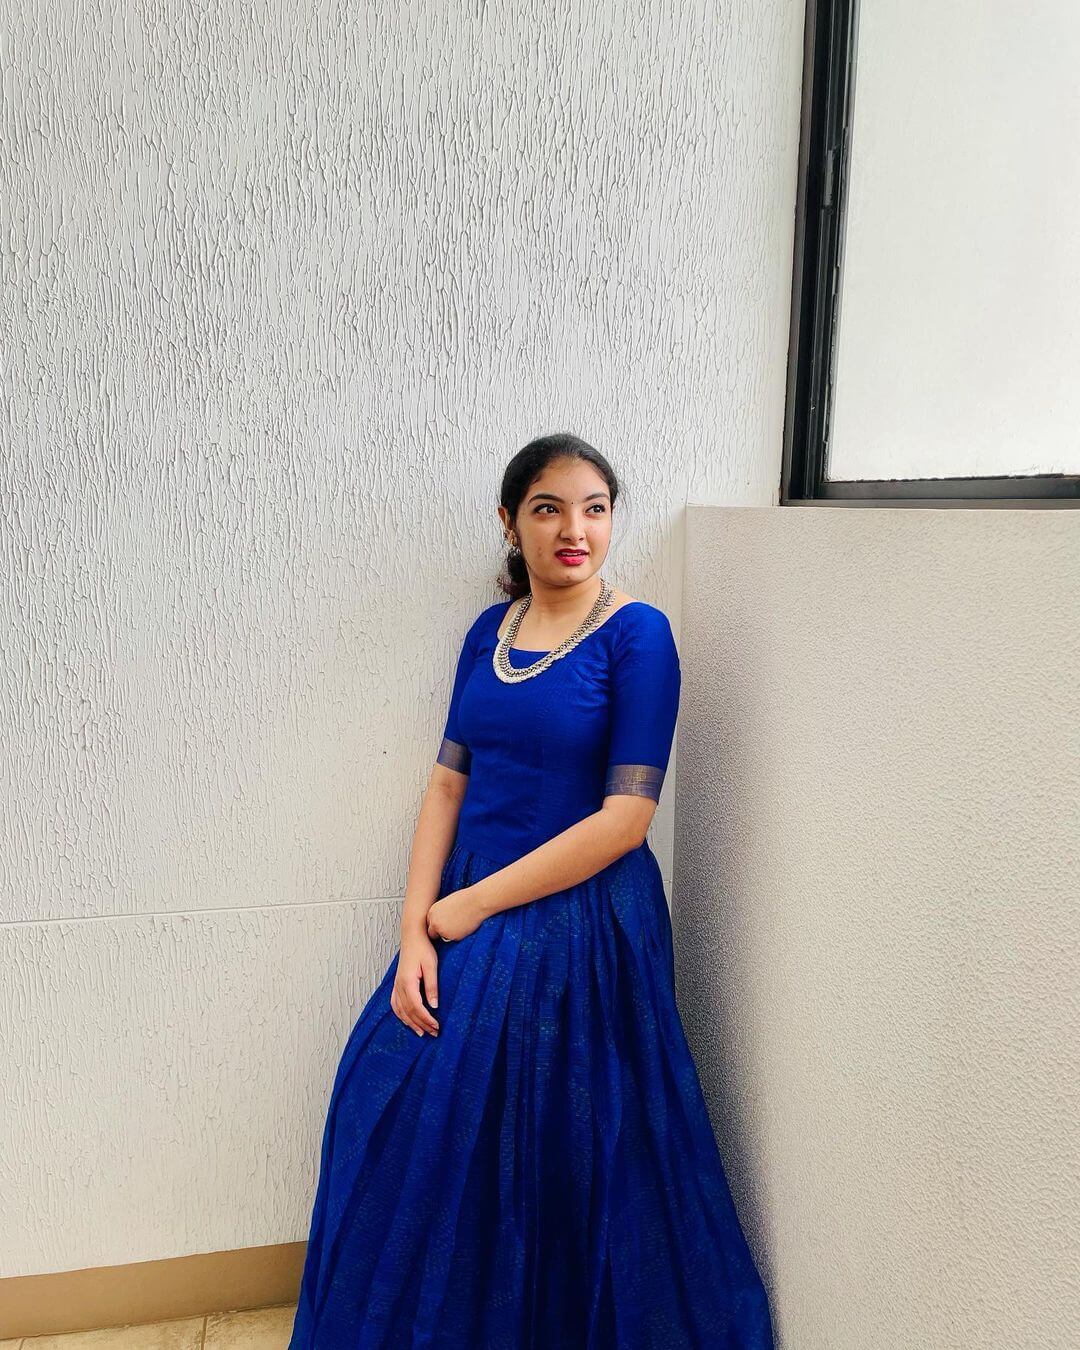 Malavika Nair In Royal Blue Blouse With Skirt Outfit